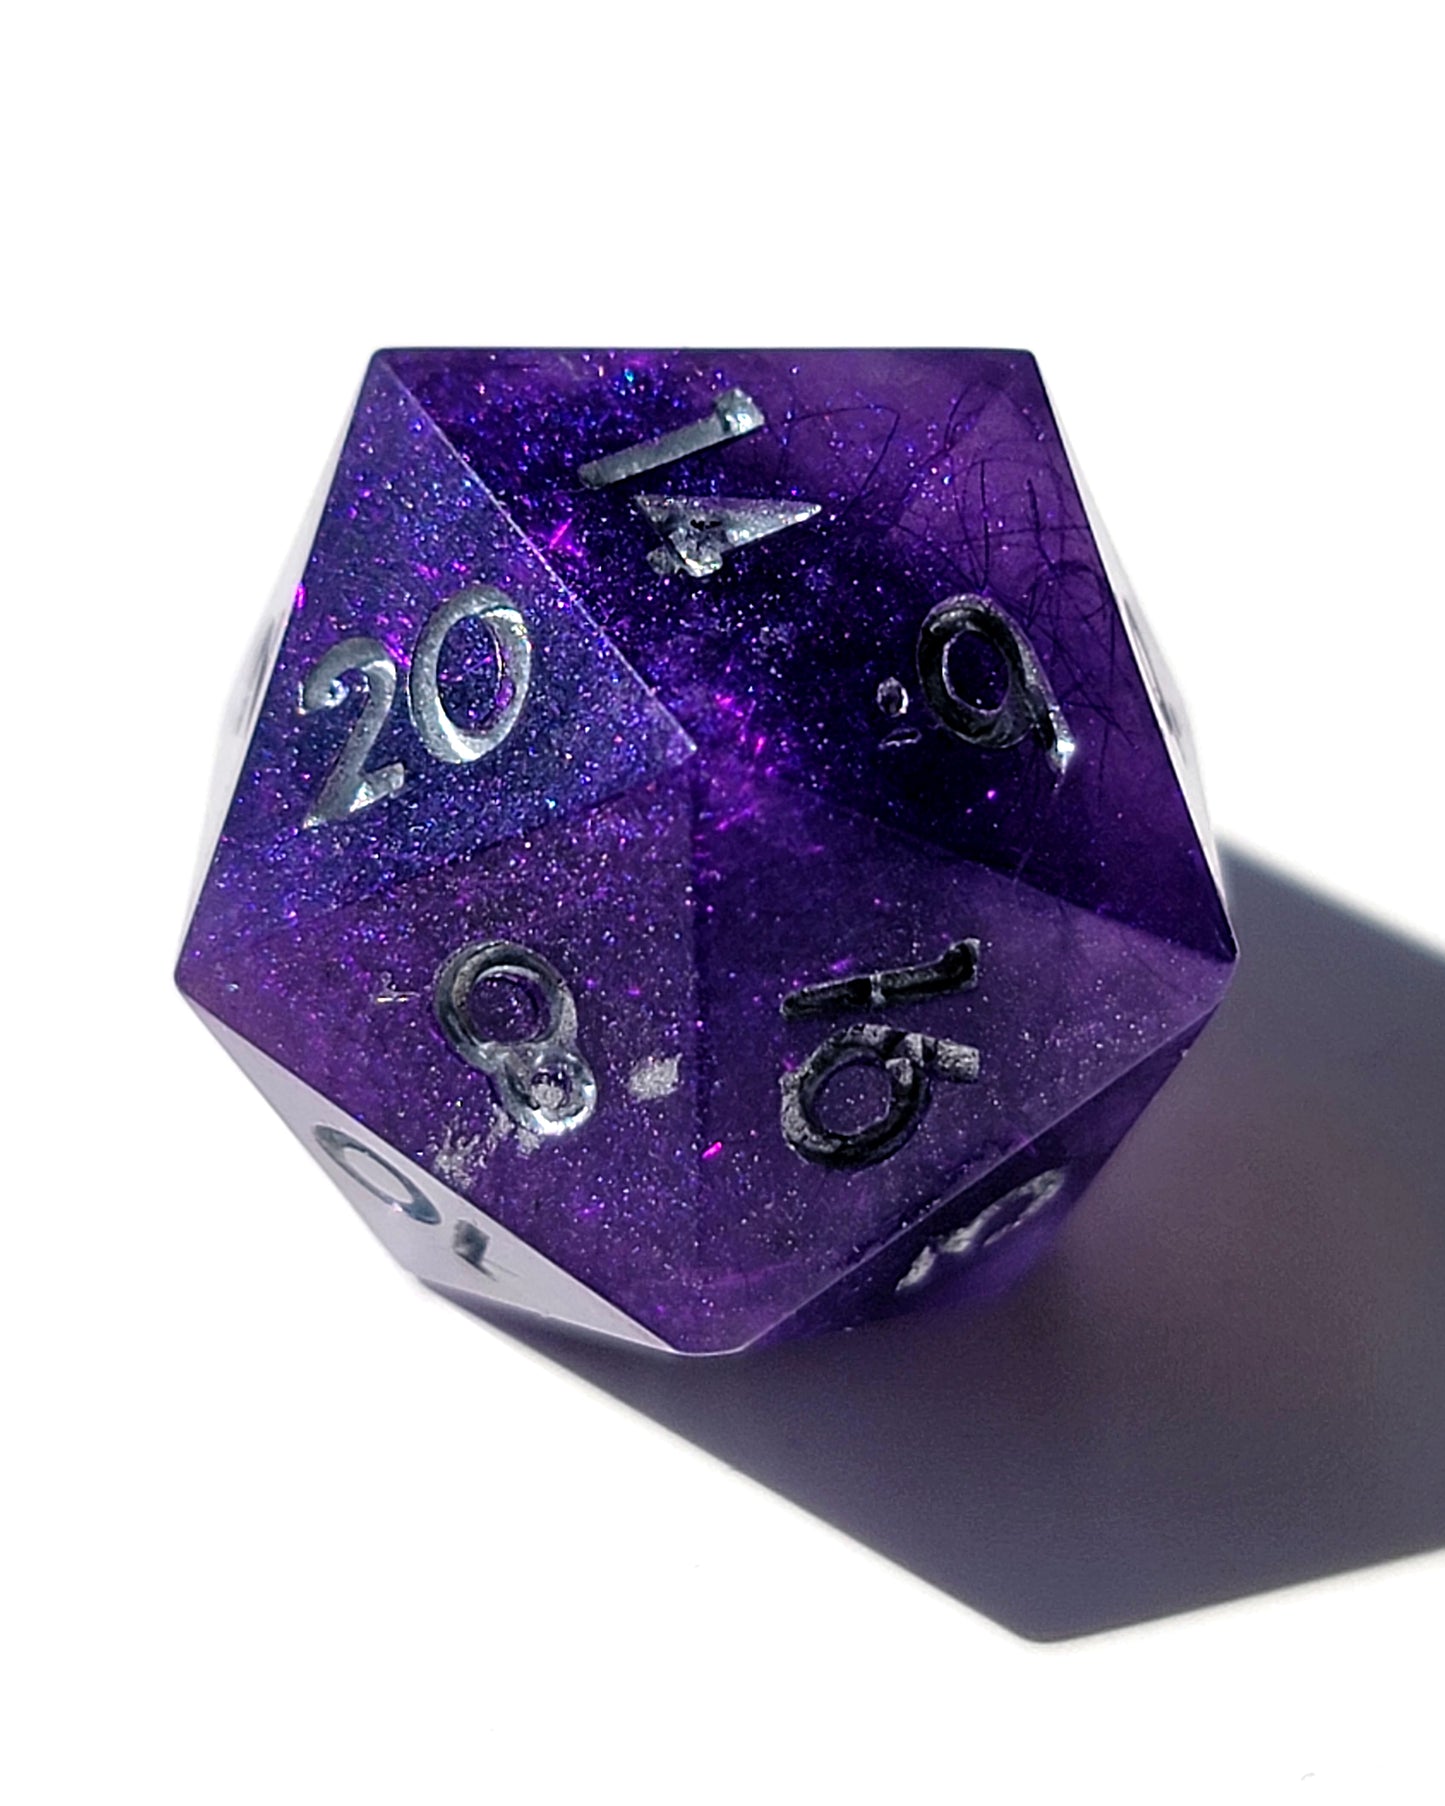 Dunamancy - Single D20 | Handmade resin dice | Handcrafted D&D Dice | Handmade Dungeons and Dragons Dice